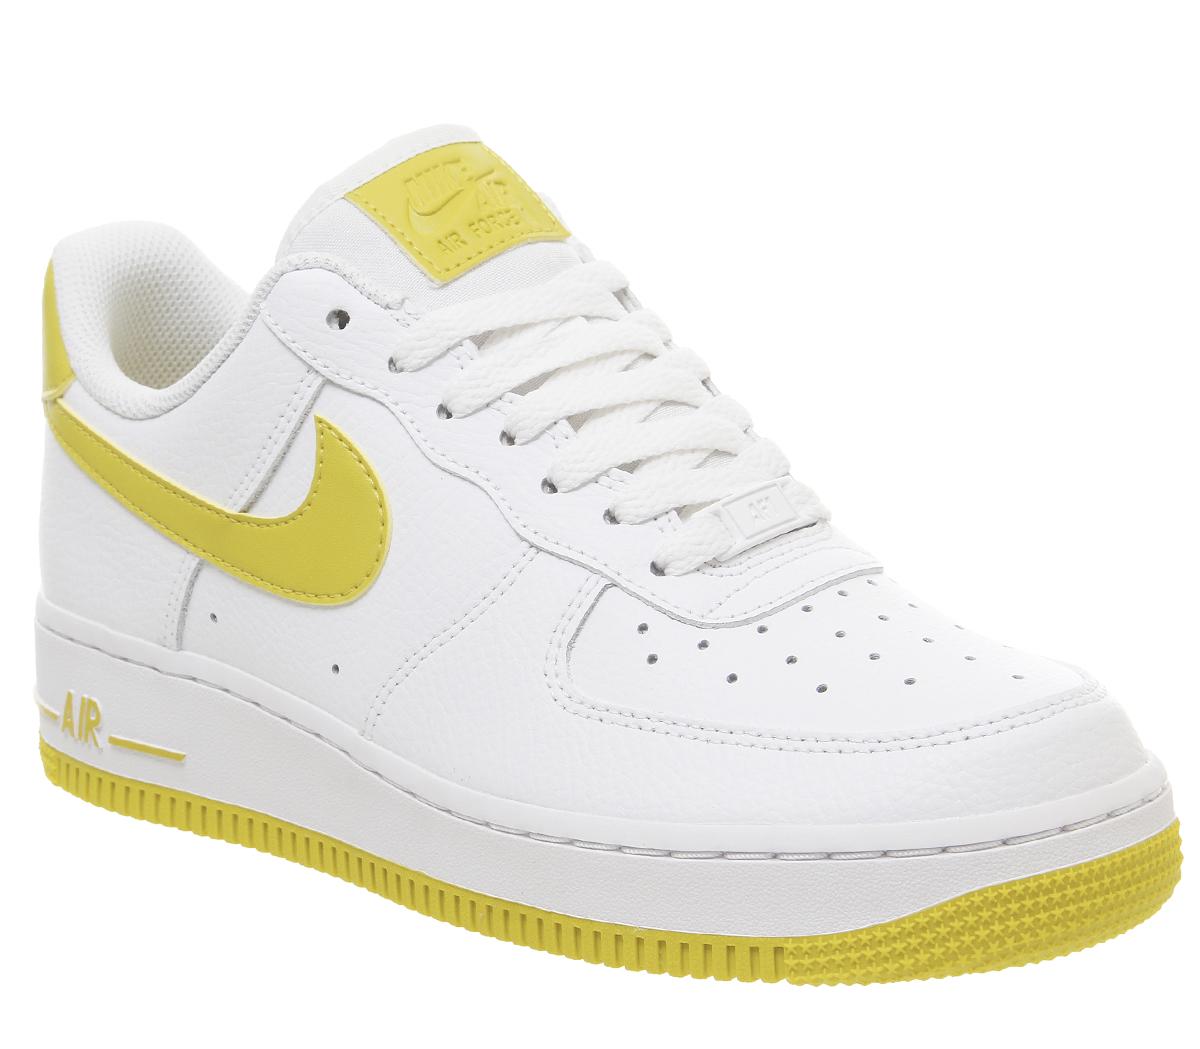 Nike Air Force 1 07 Trainers White Bright Citron - Hers trainers